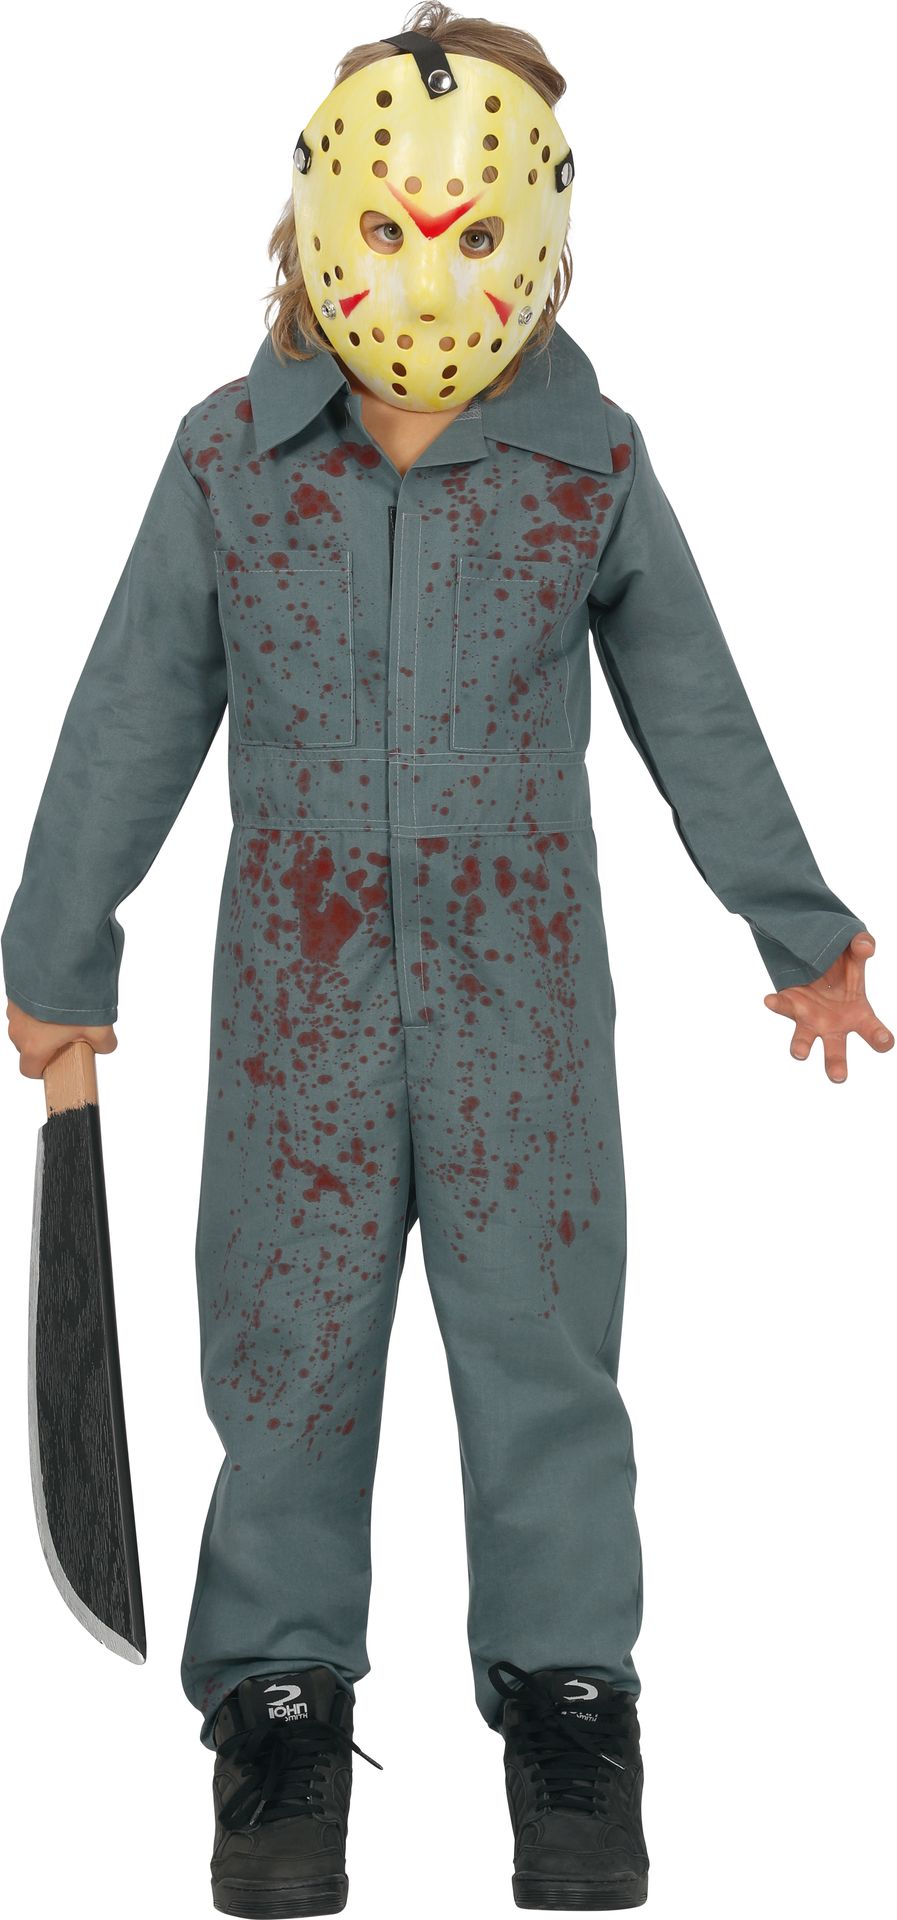 Horror Jason Voorhees outfit kind